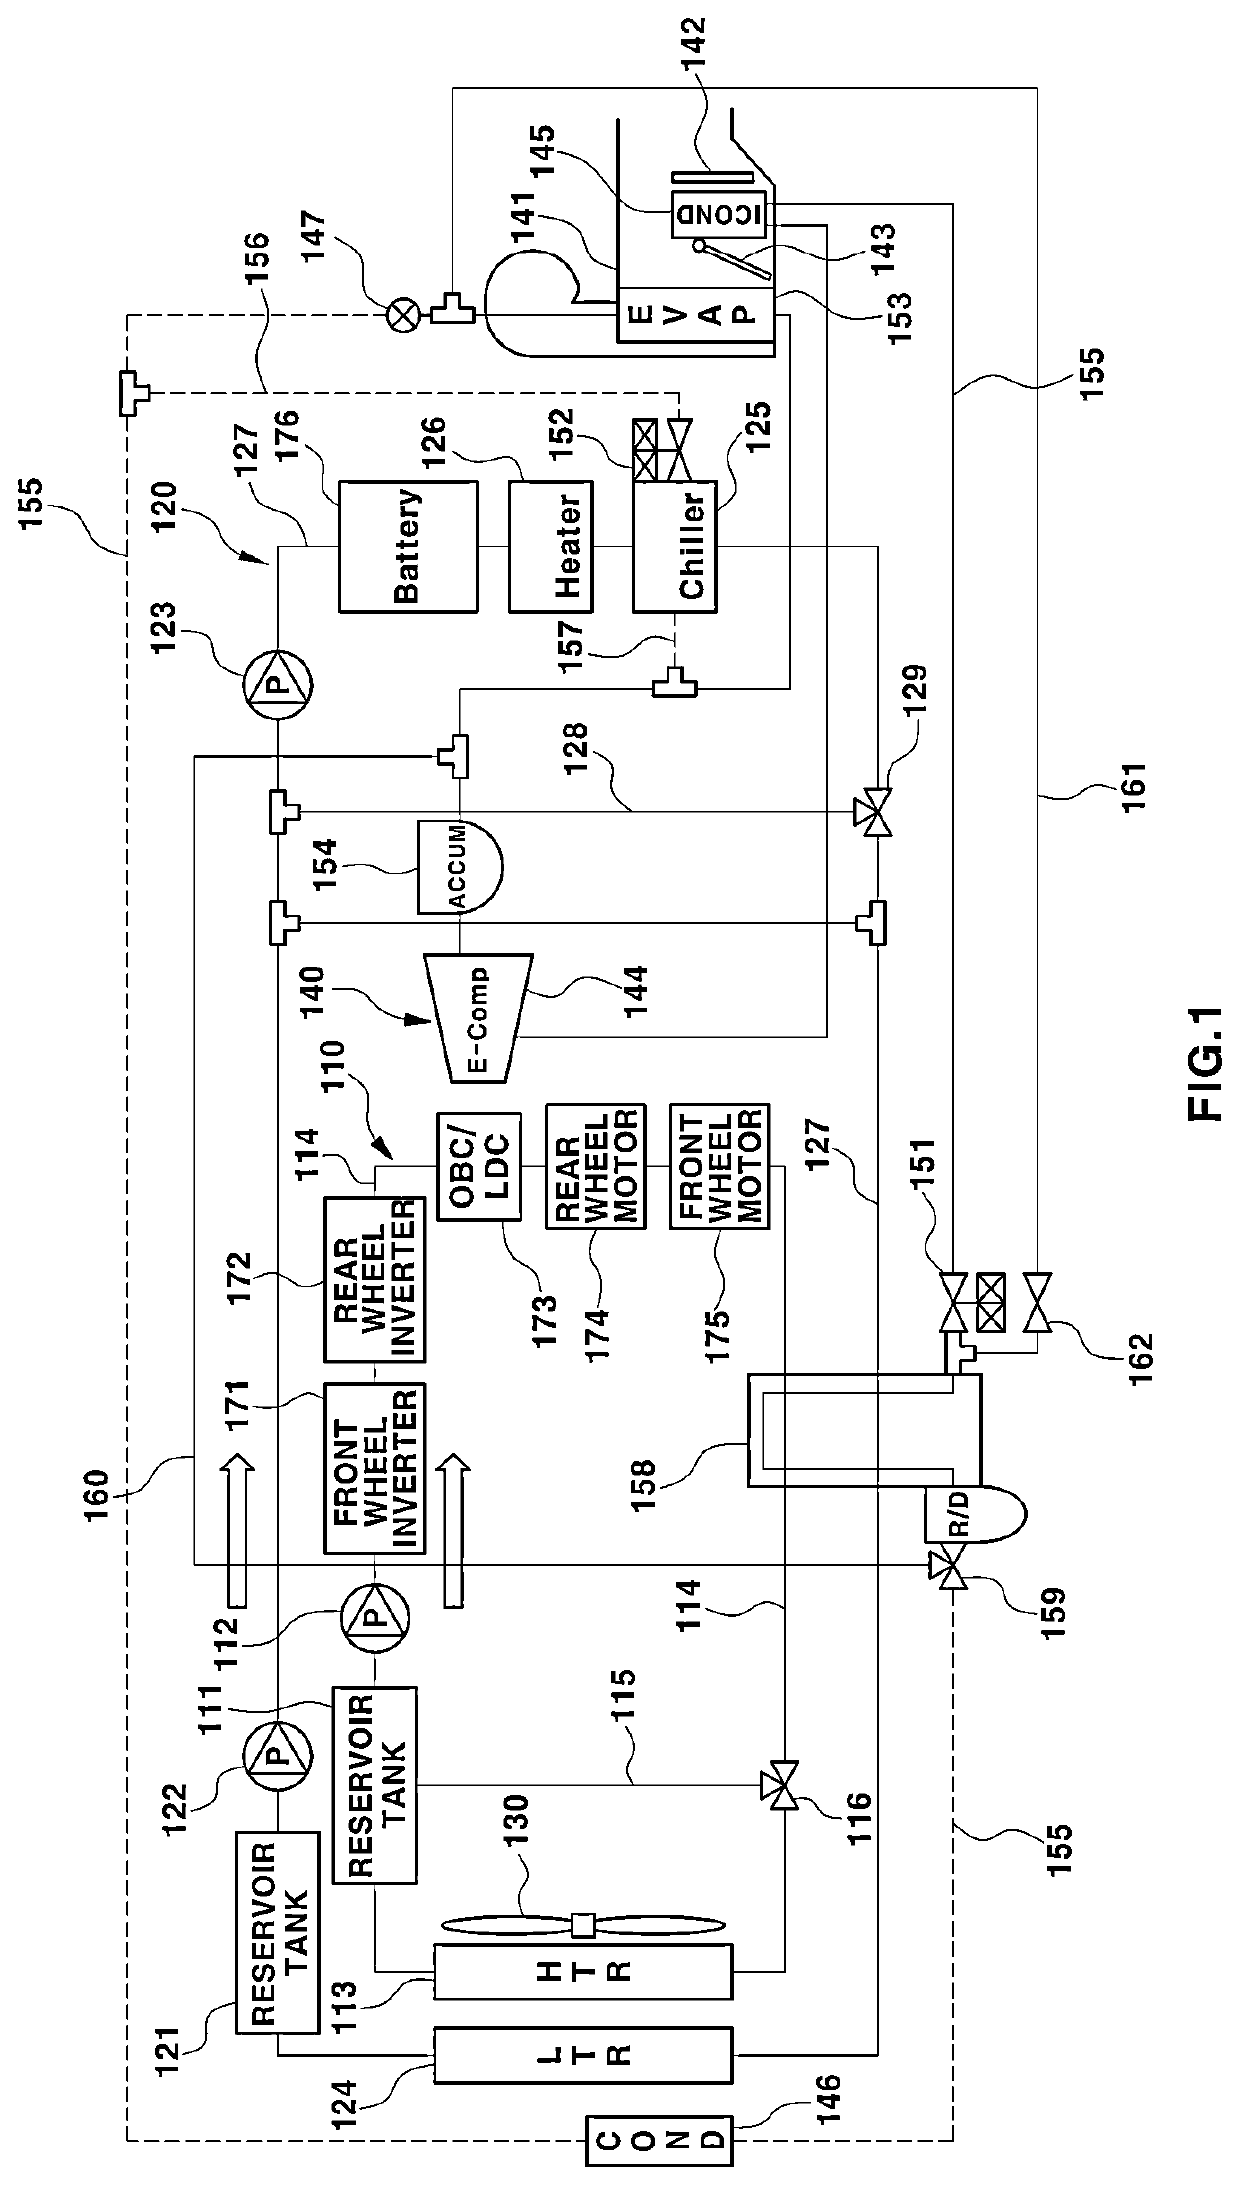 Thermal management system for electric vehicles